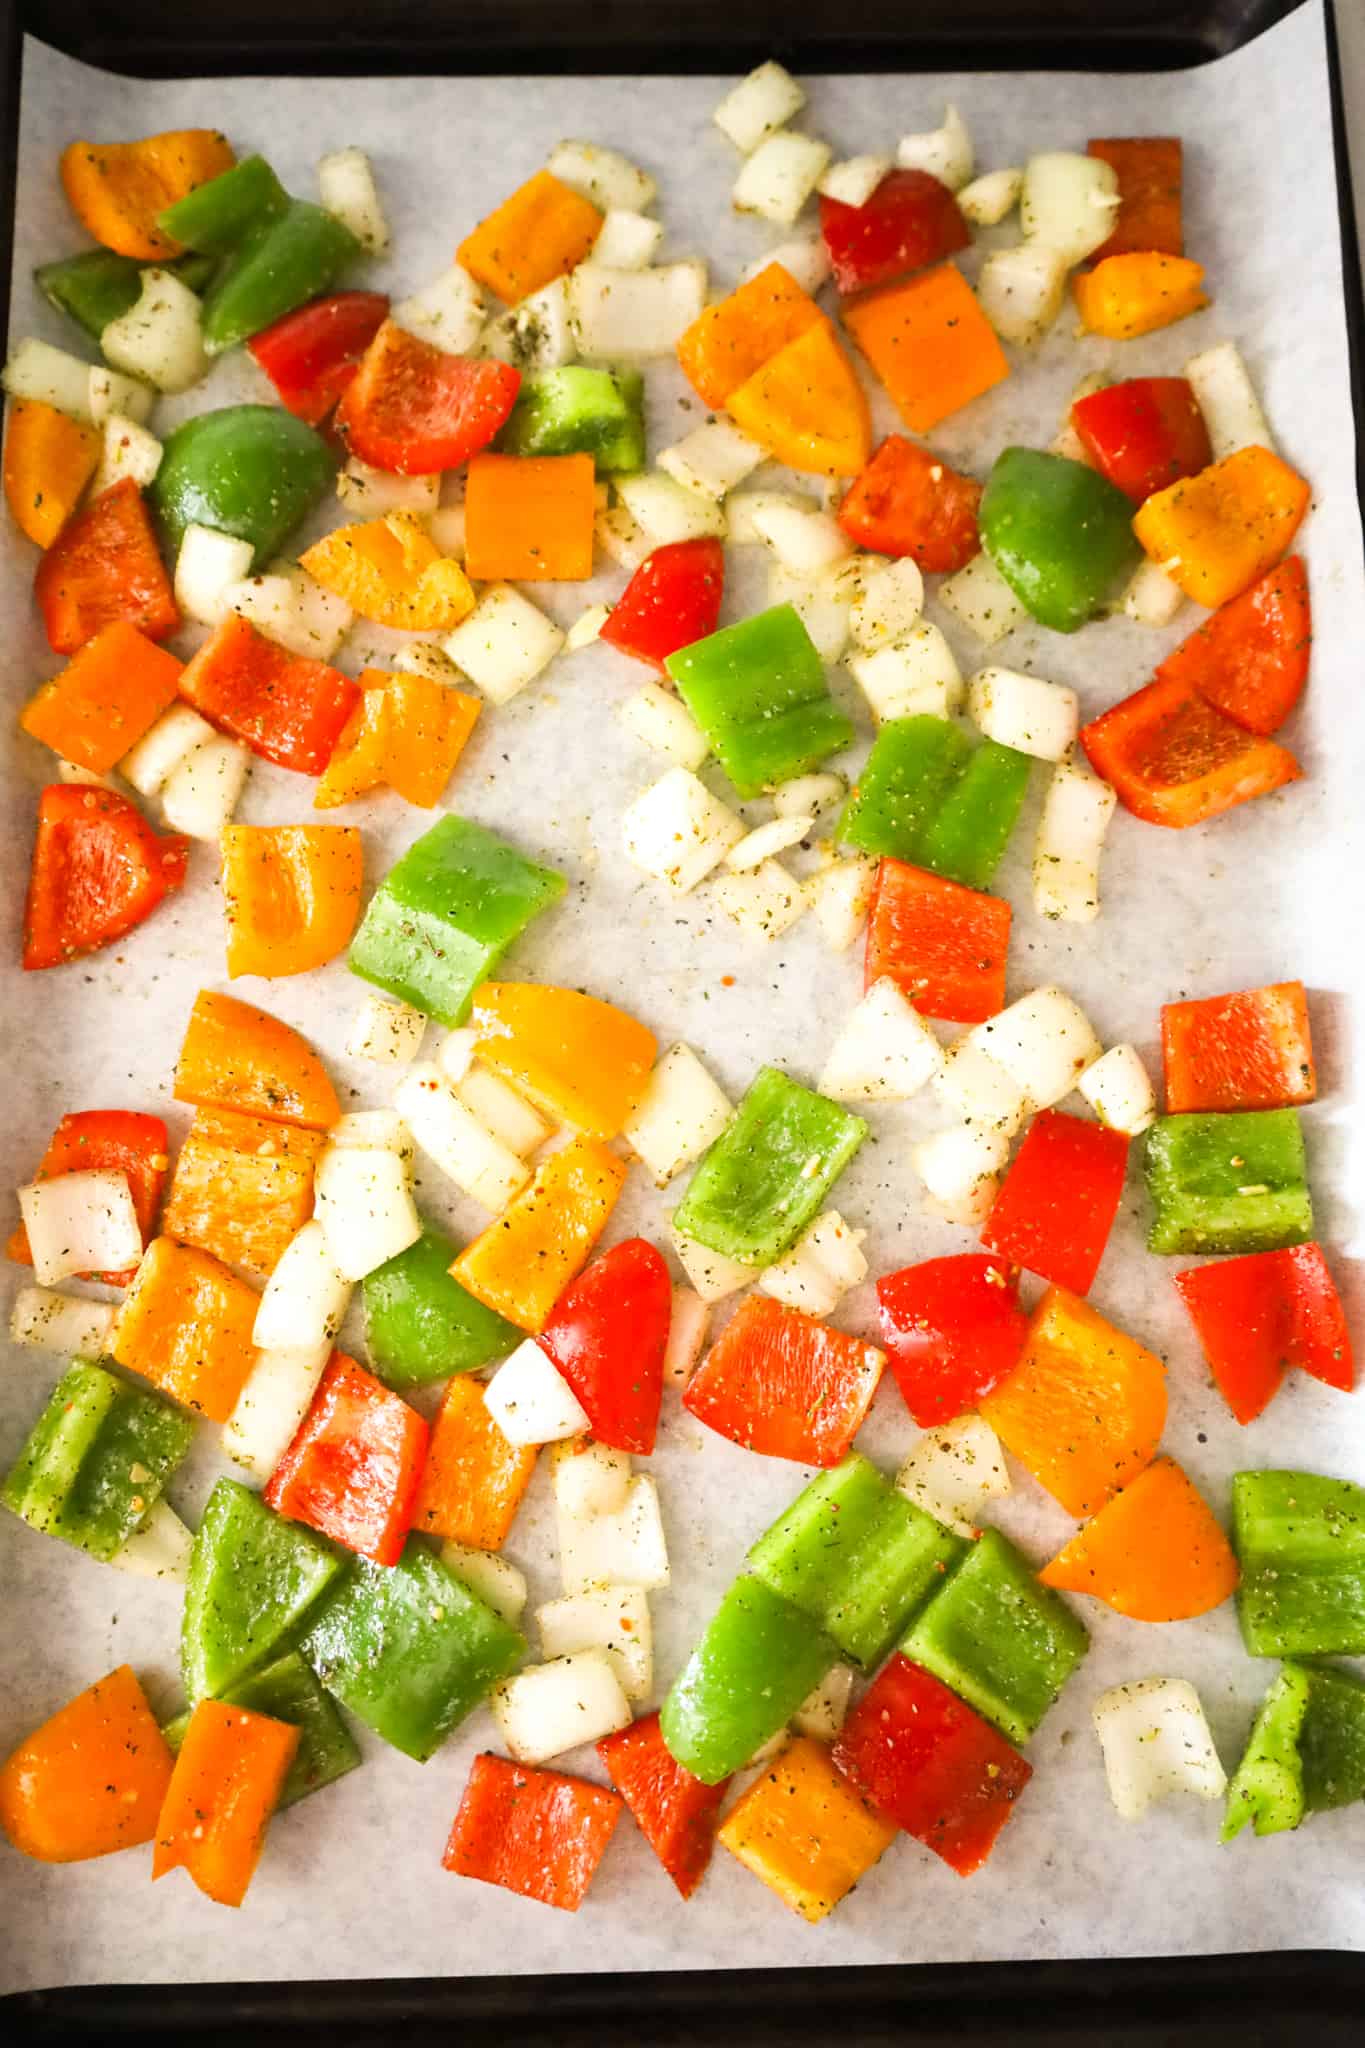 diced peppers and onions on a parchment lined baking sheet